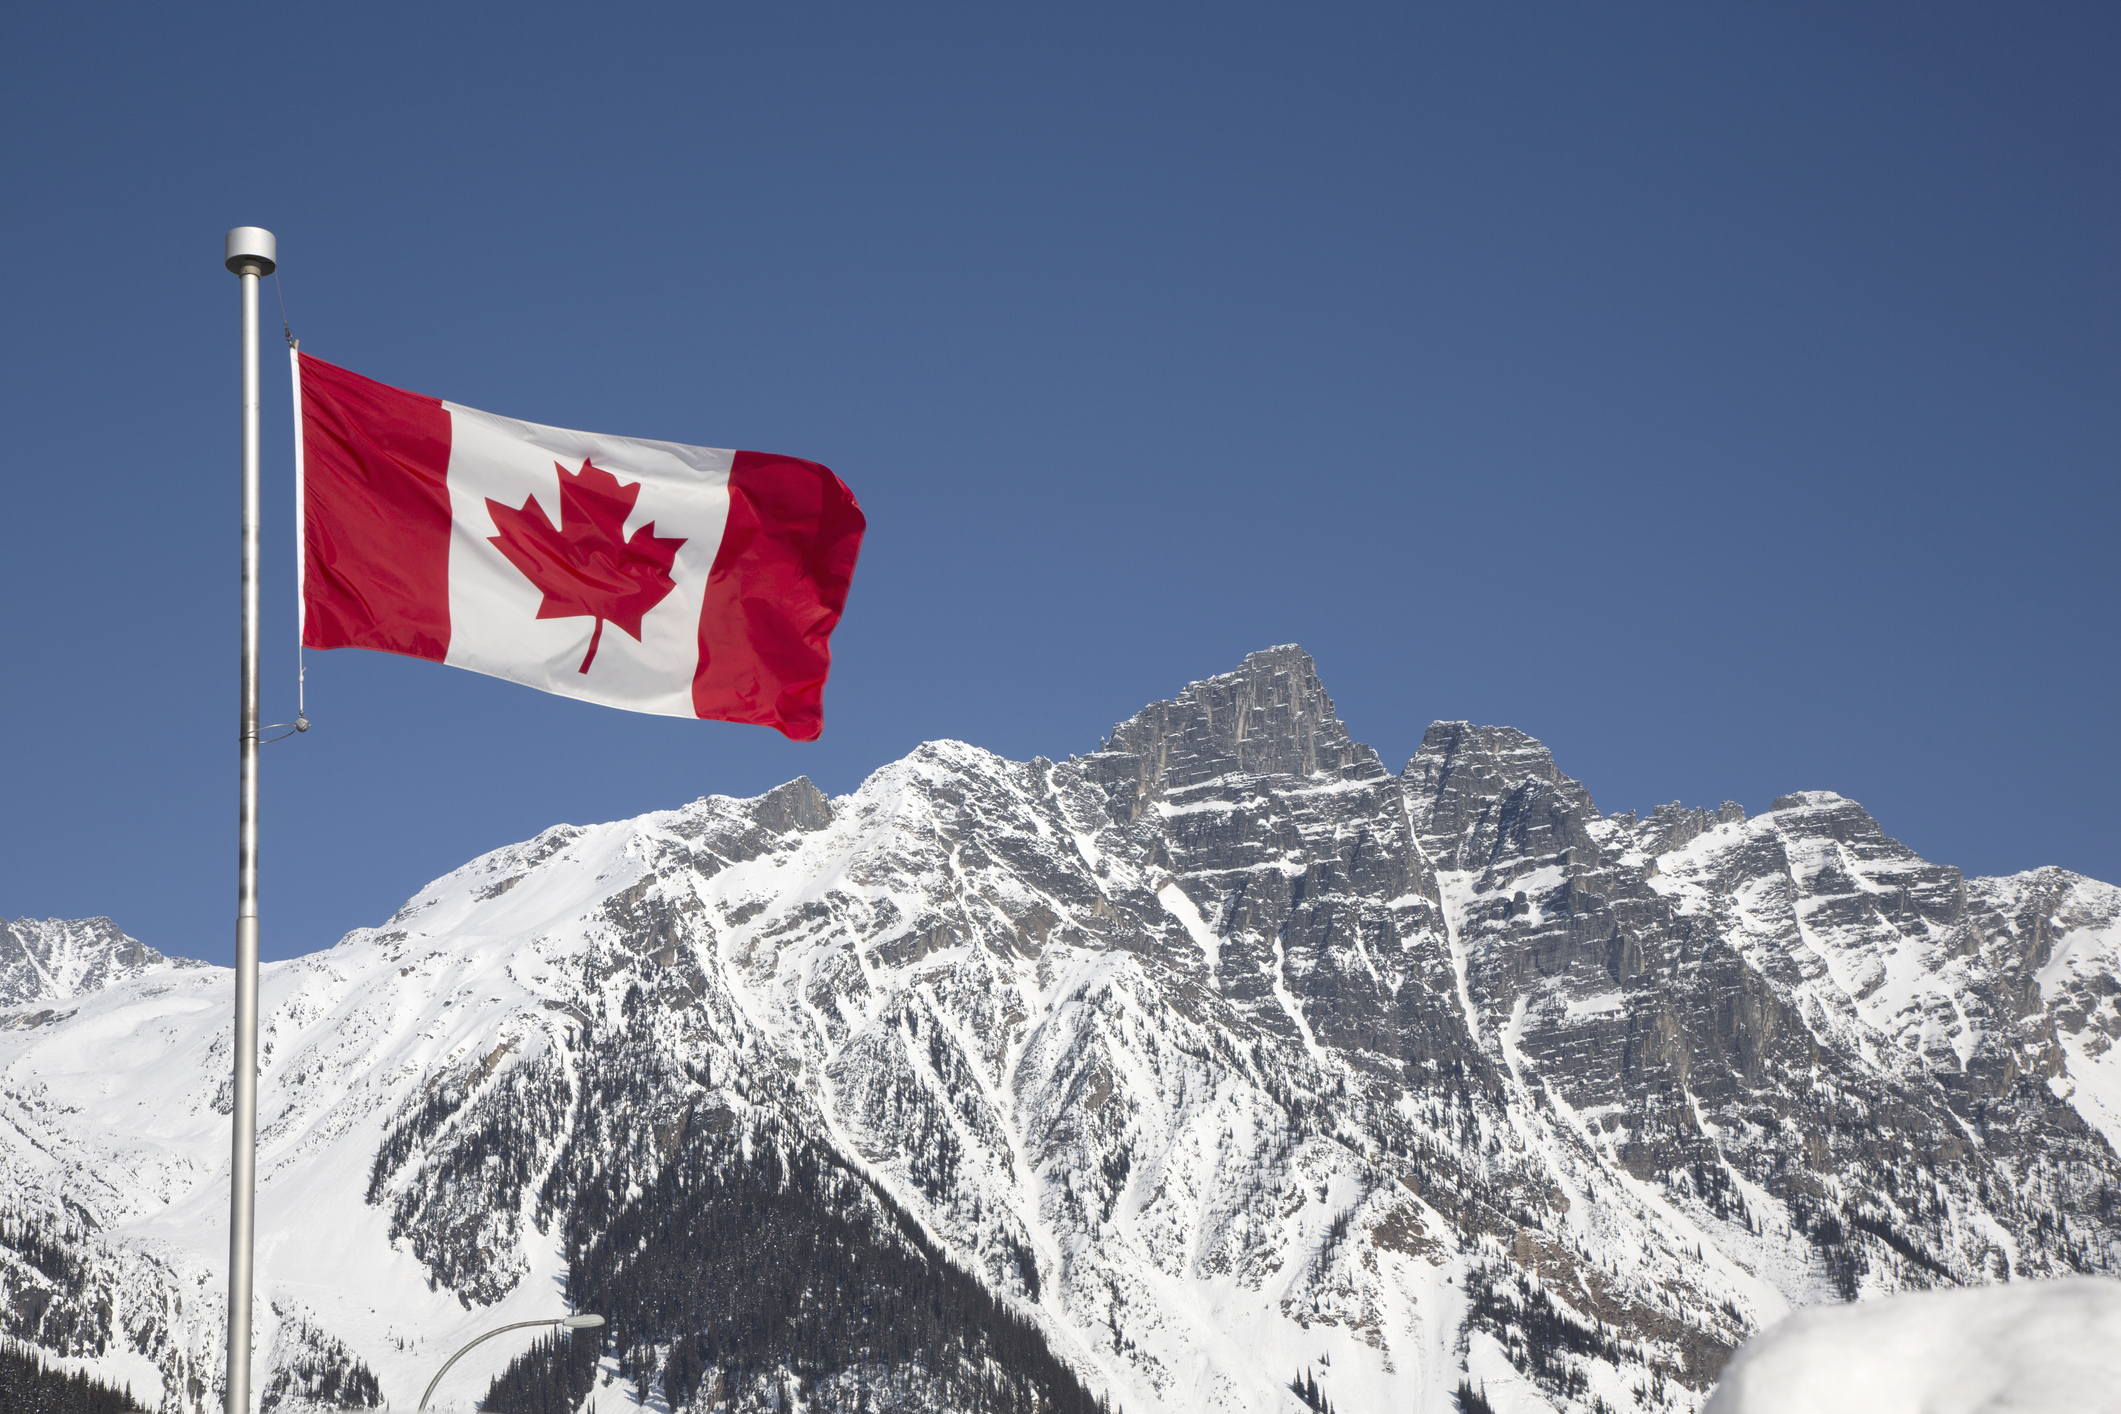 Canadian flag waving in front of snow-covered mountains